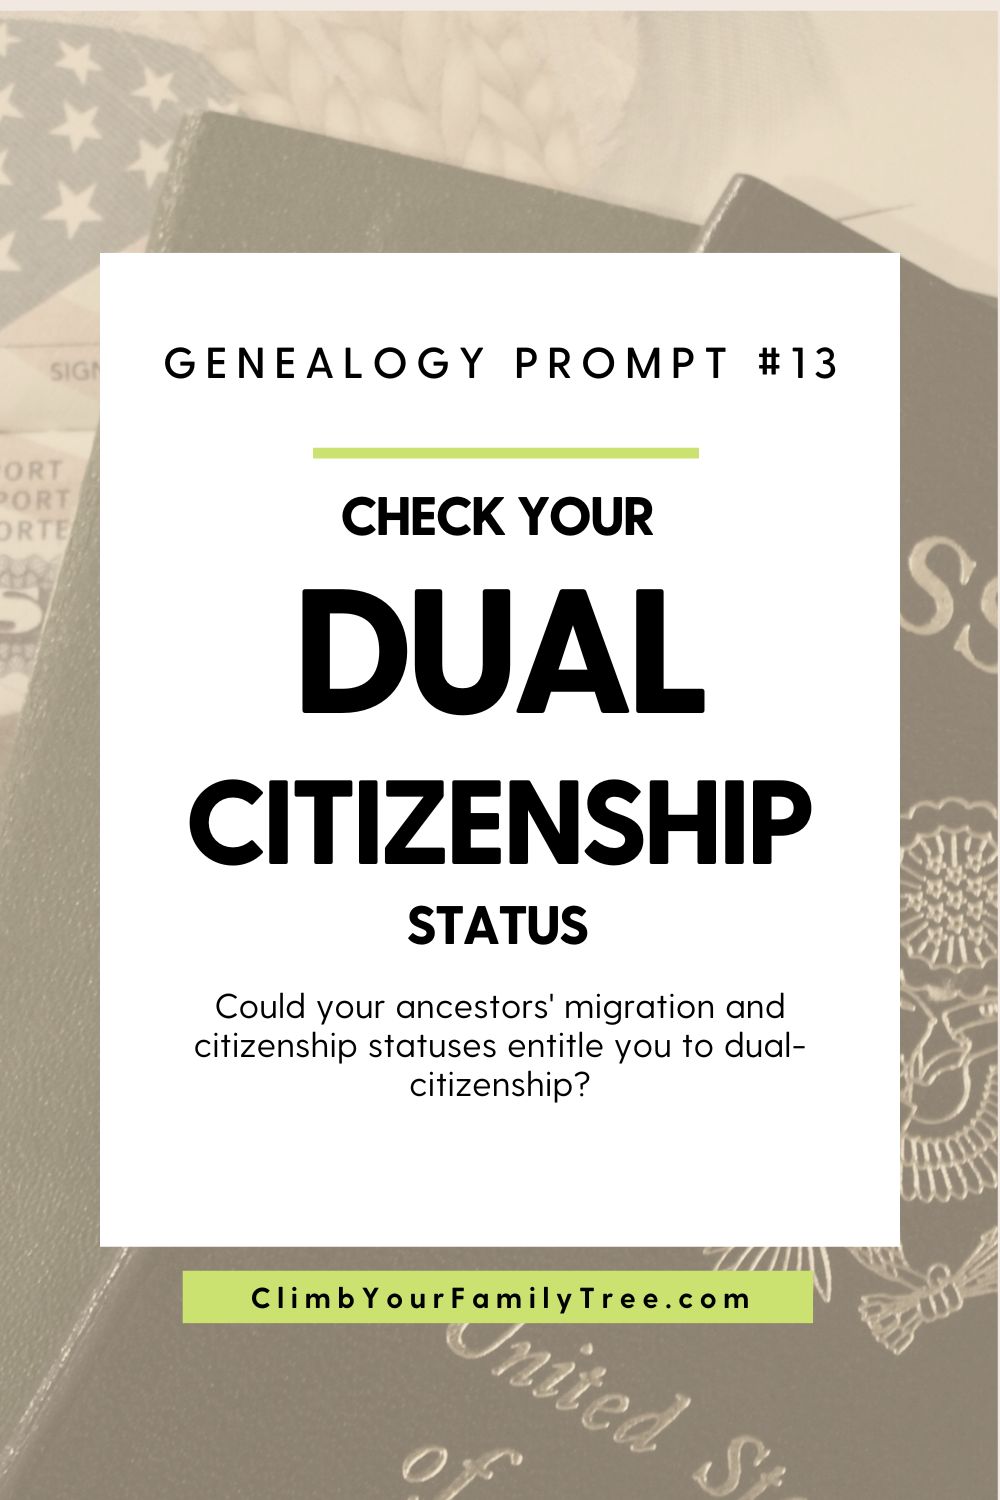 Genealogy Prompt 13 - Check Your Dual Citizenship Status - Could your ancestors' migration and citizenship statuses entitle you to dual-citizenship?